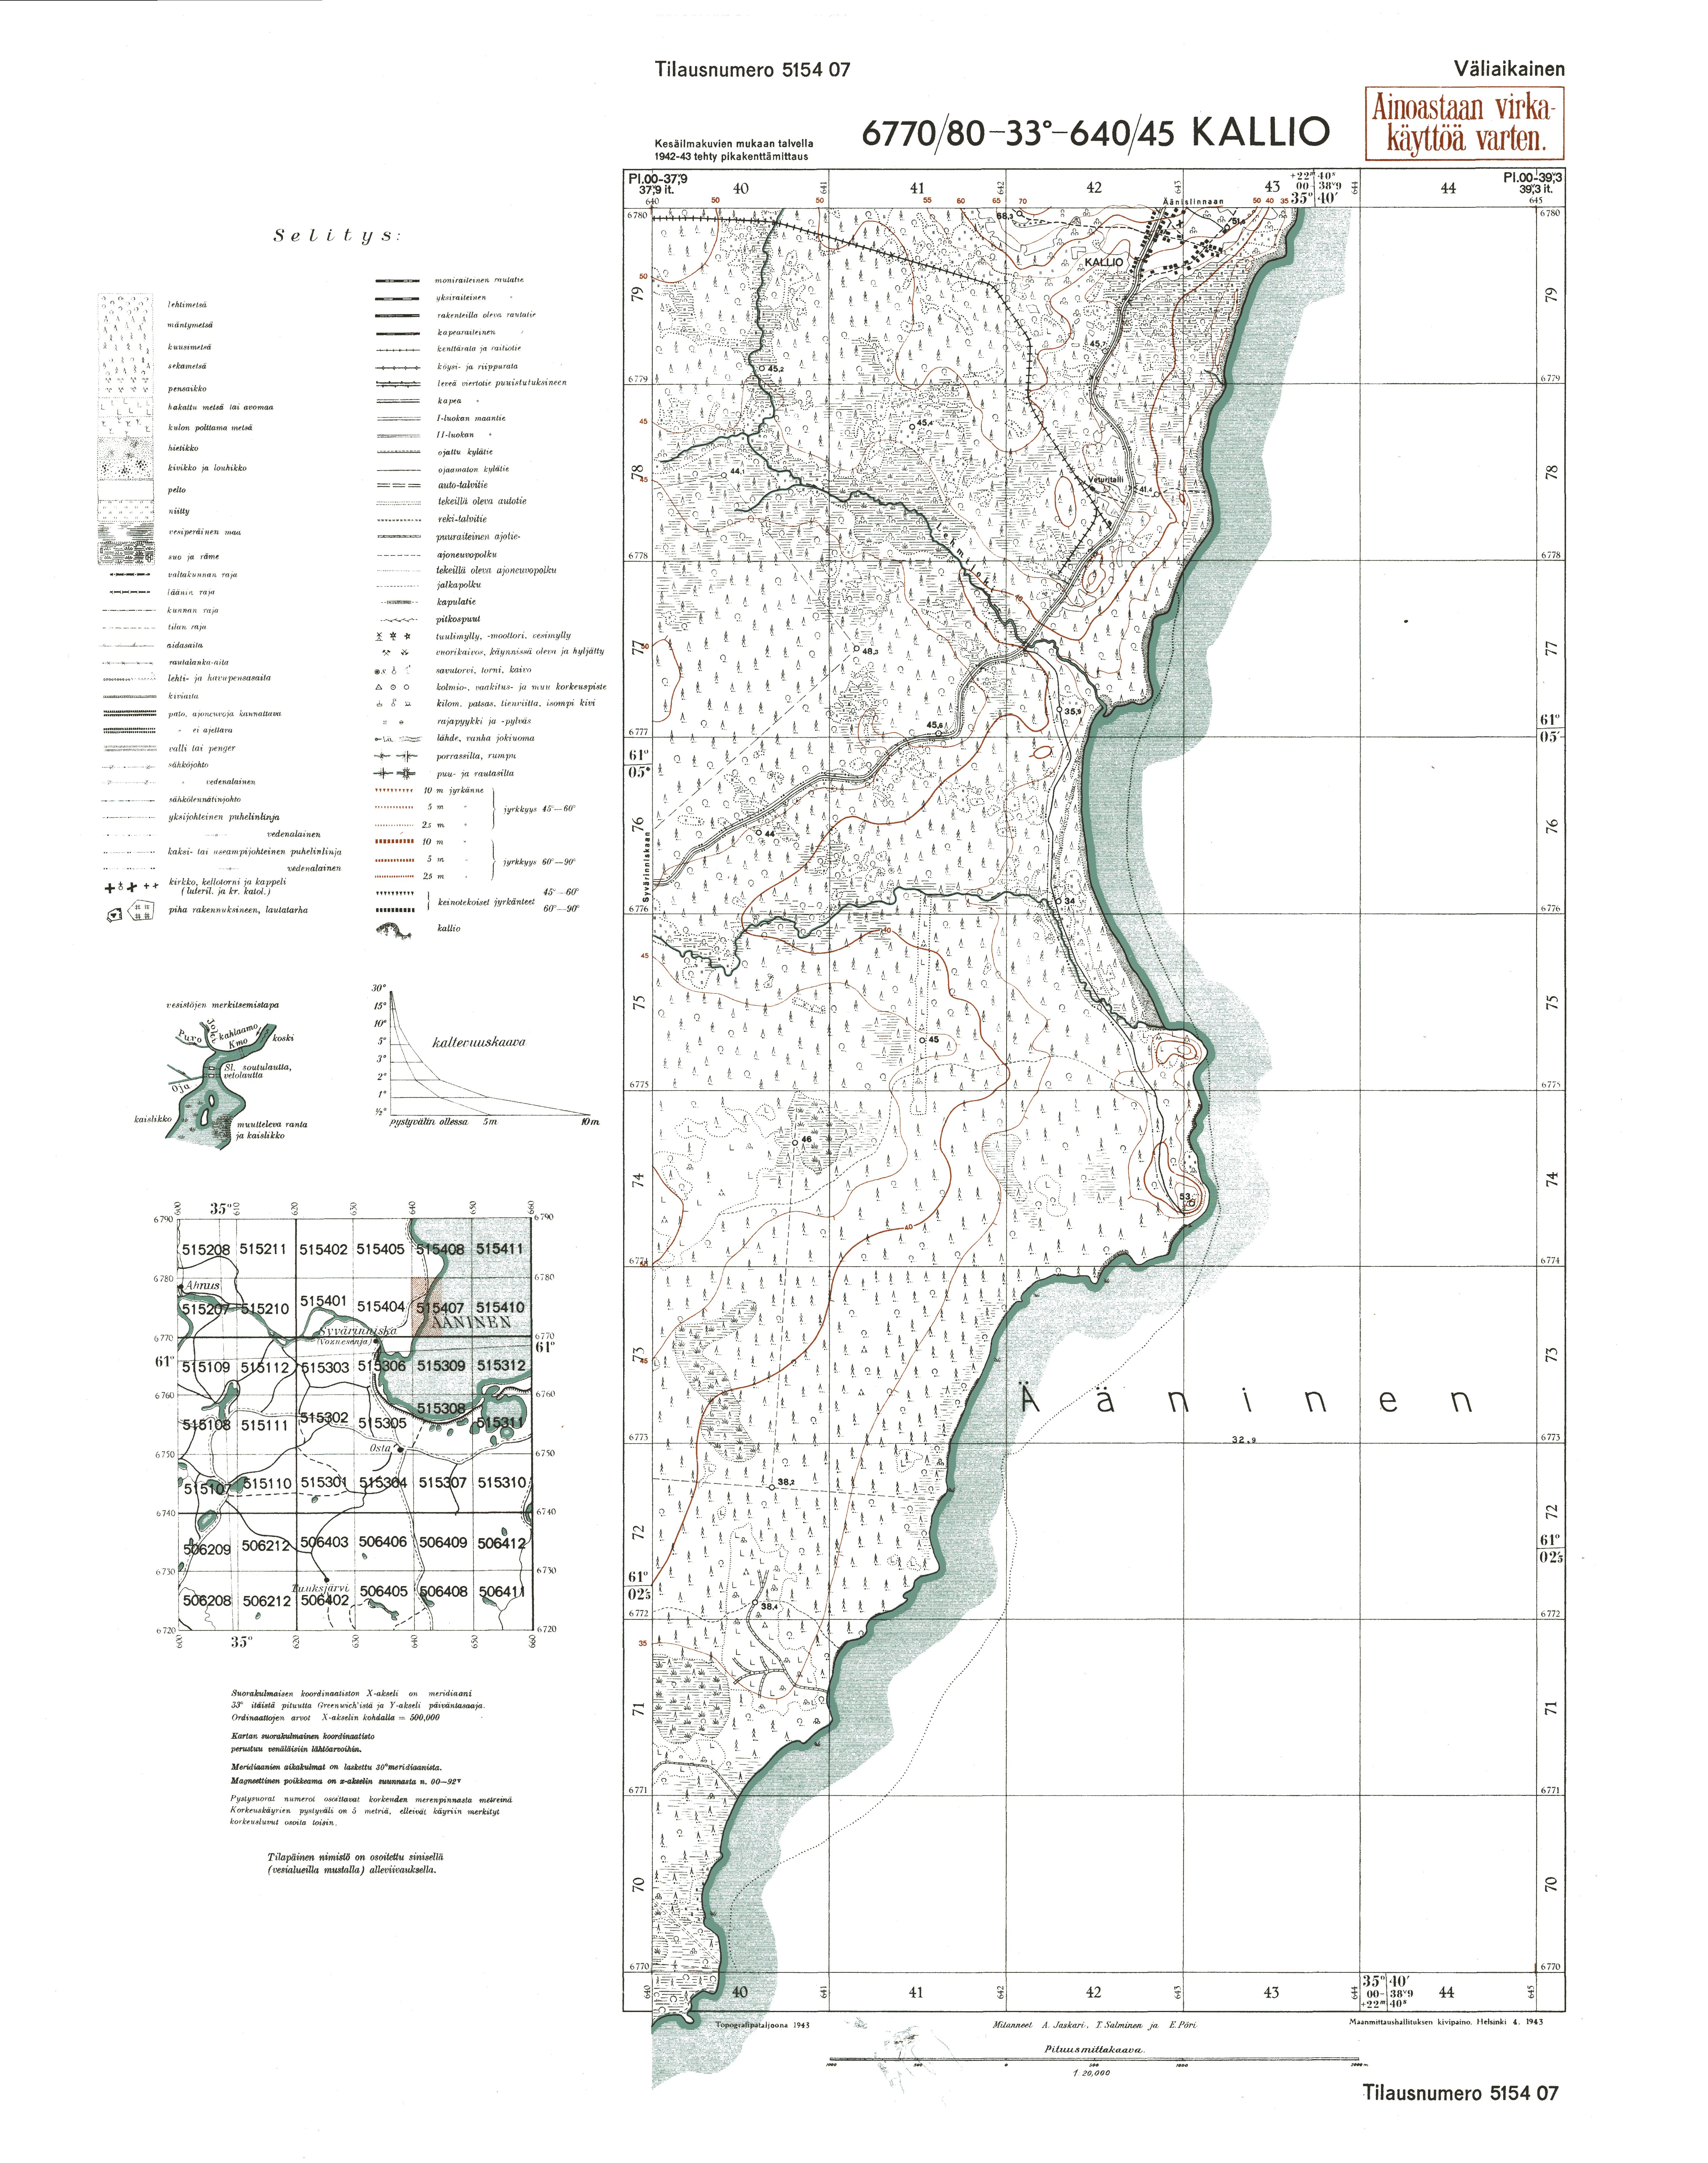 Štšelejki. Kallio. Topografikartta 515407. Topographic map from 1943. Use the zooming tool to explore in higher level of detail. Obtain as a quality print or high resolution image